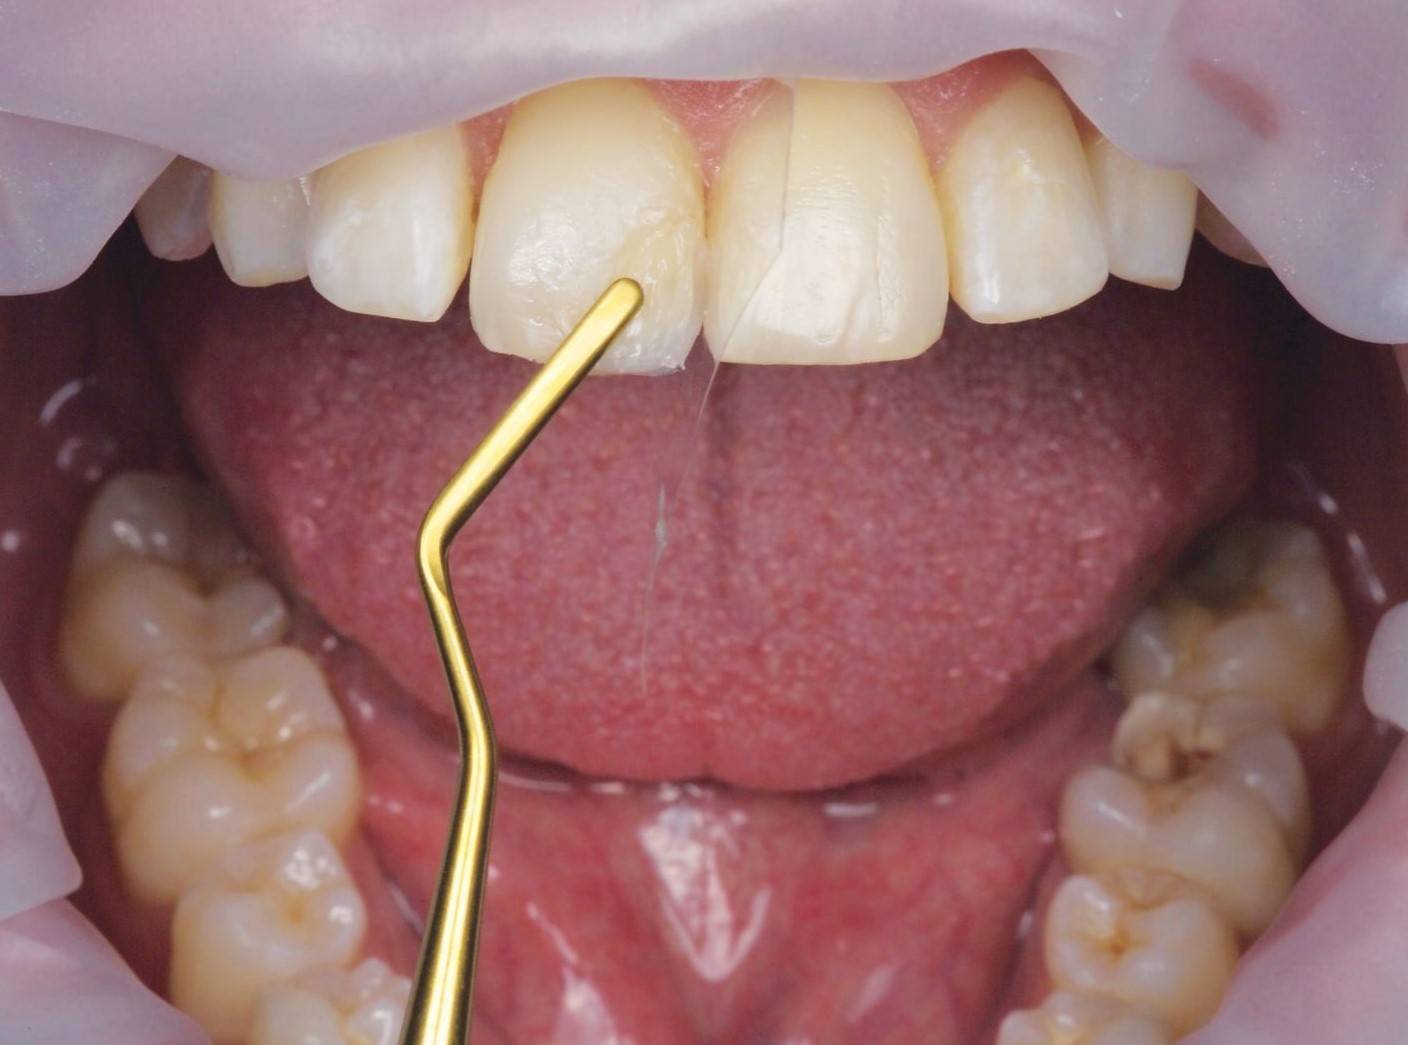 Composite instrument touching upper tooth being restored